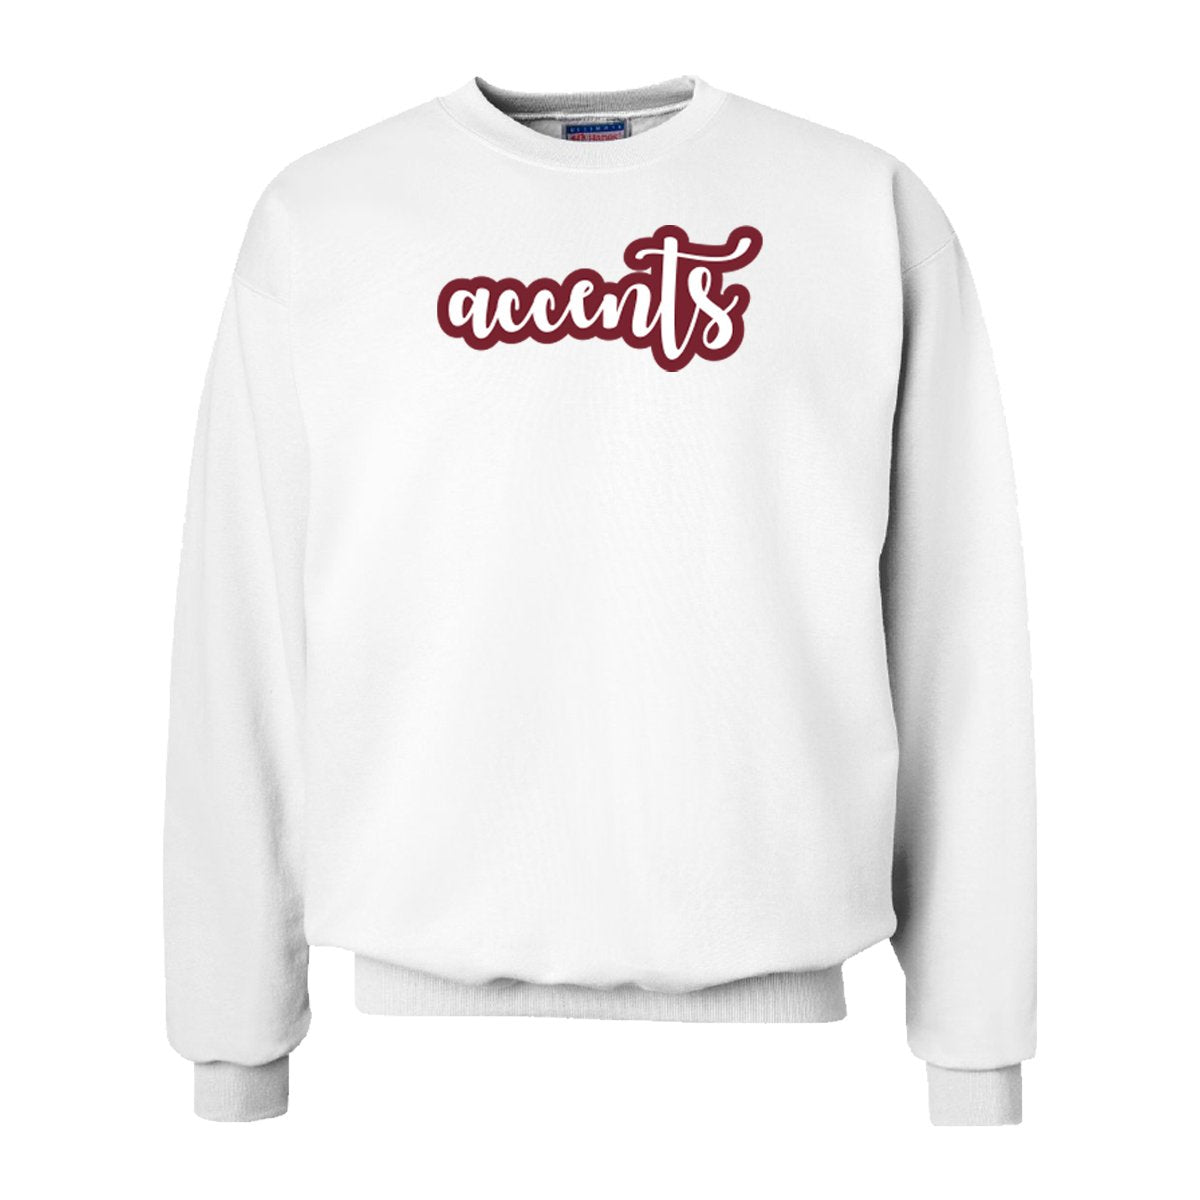 Accents White Sewn On Letter Crewneck